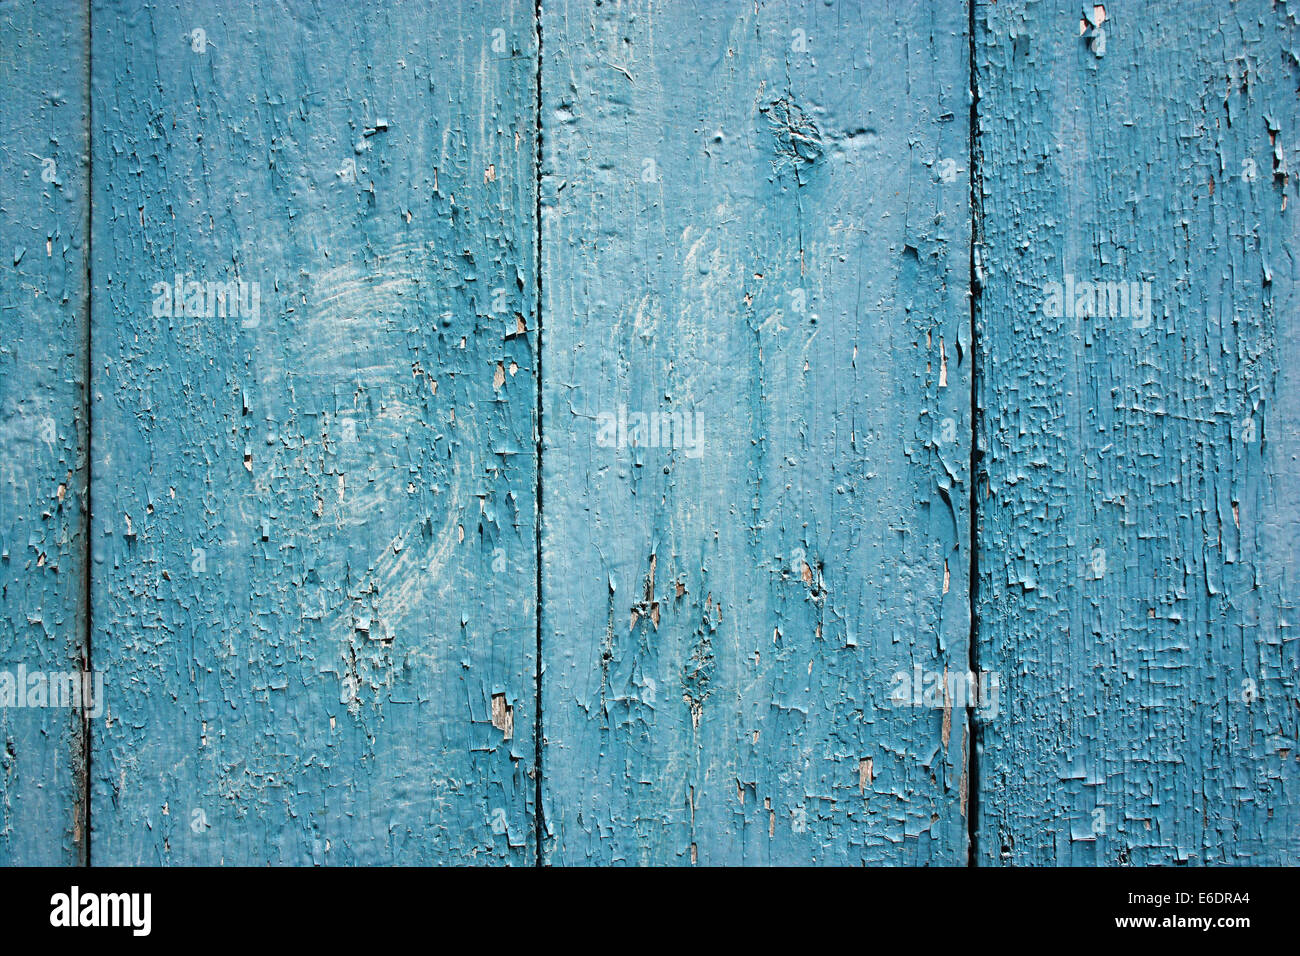 Abstract old grunge cracked paint background texture with scratc Stock Photo